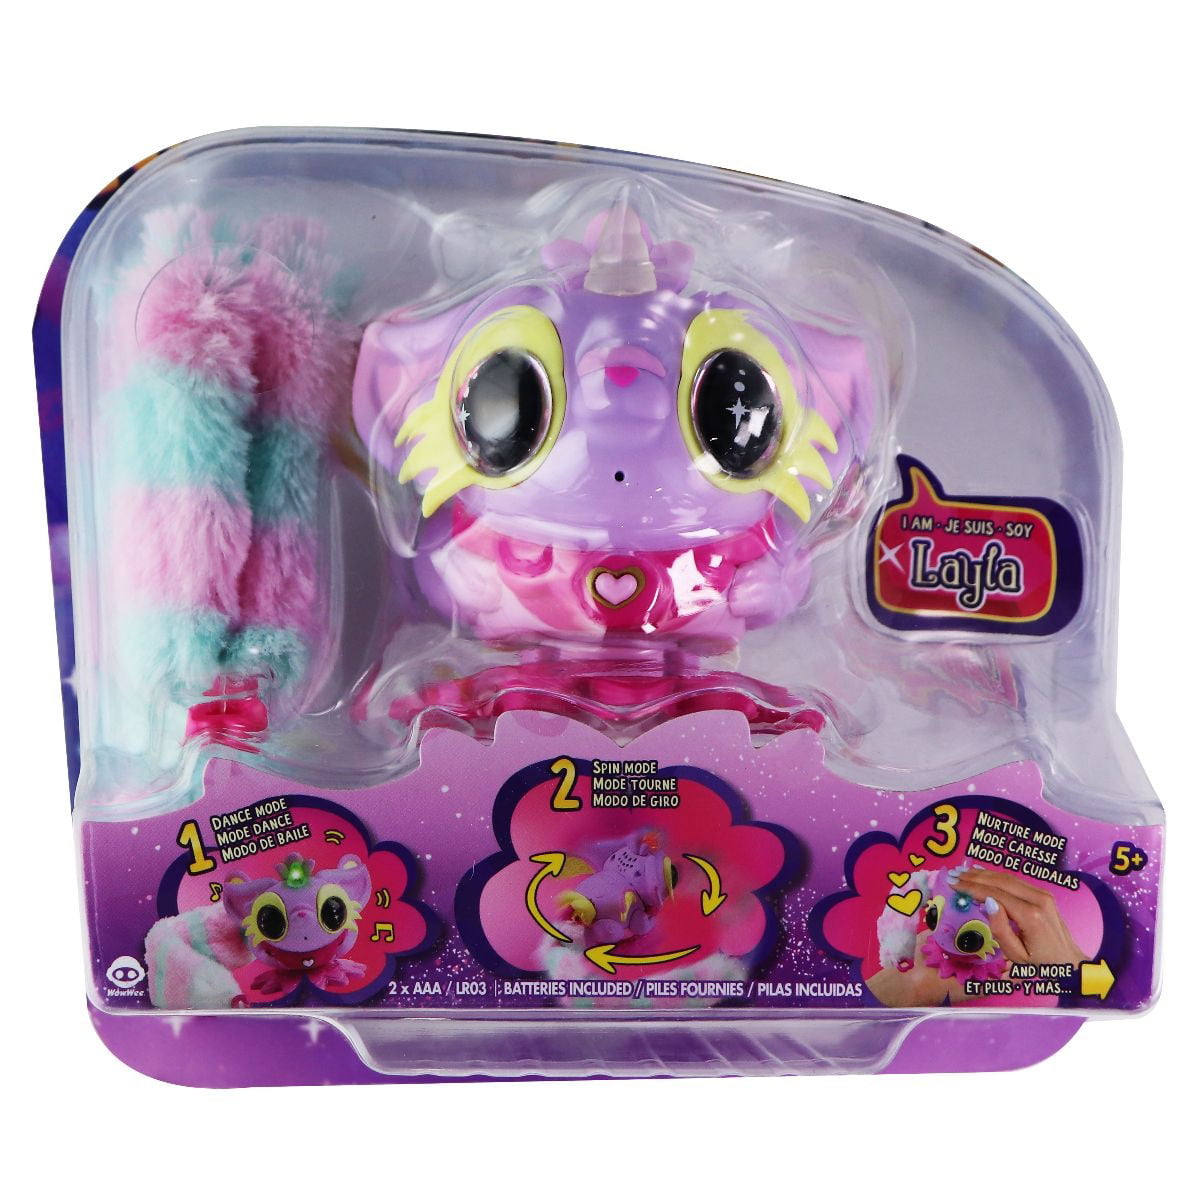 WowWee Pixie ️ Belles Layla Purple Interactive Animal Toy Wearable Ages 5 for sale online 